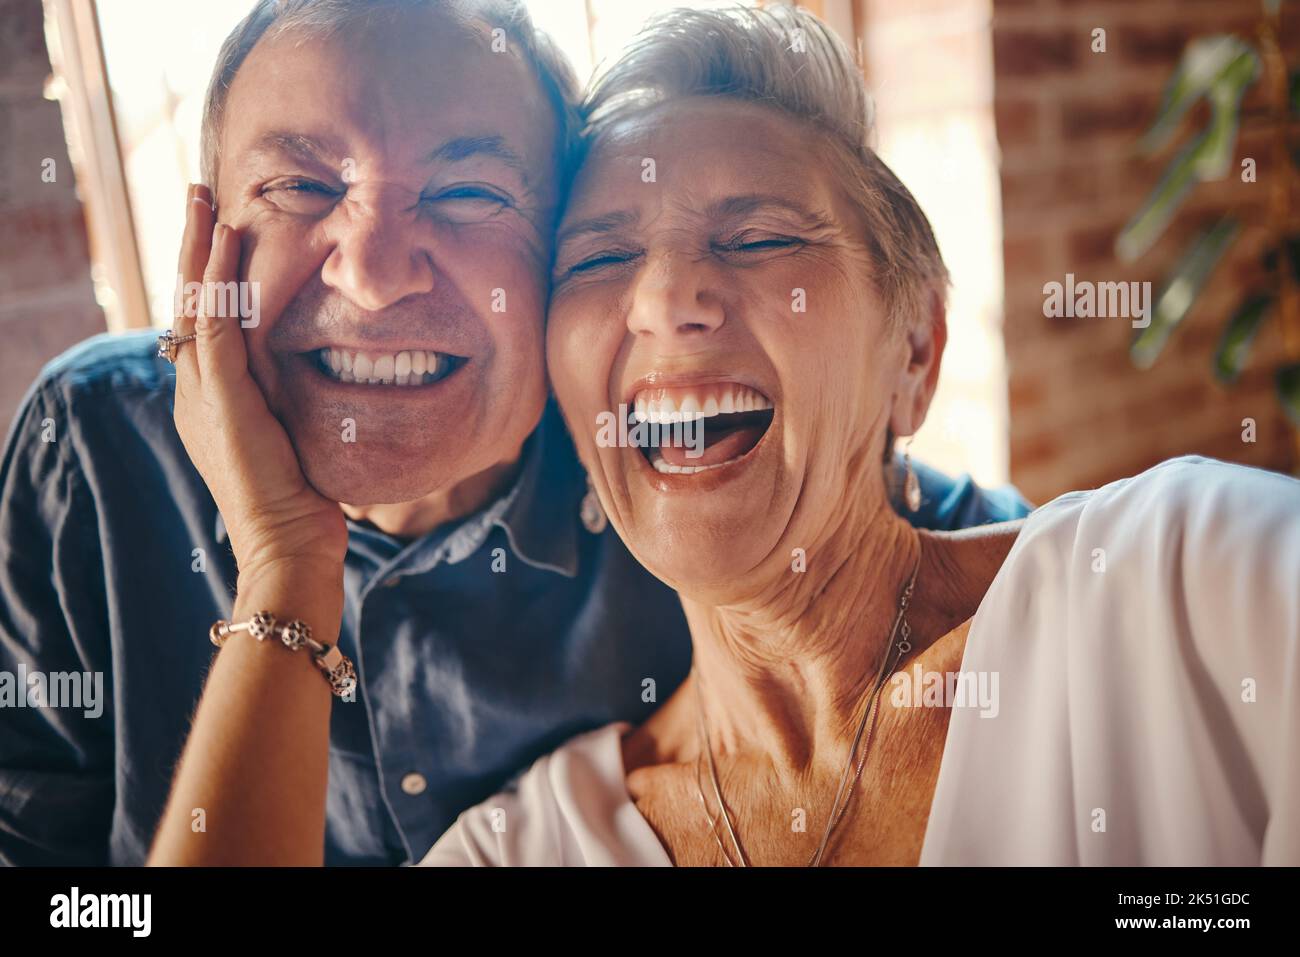 Happy senior couple, funny selfie portrait in retirement and embrace marriage lifestyle on Rome holiday. Woman show teeth with smile, comic man laugh Stock Photo